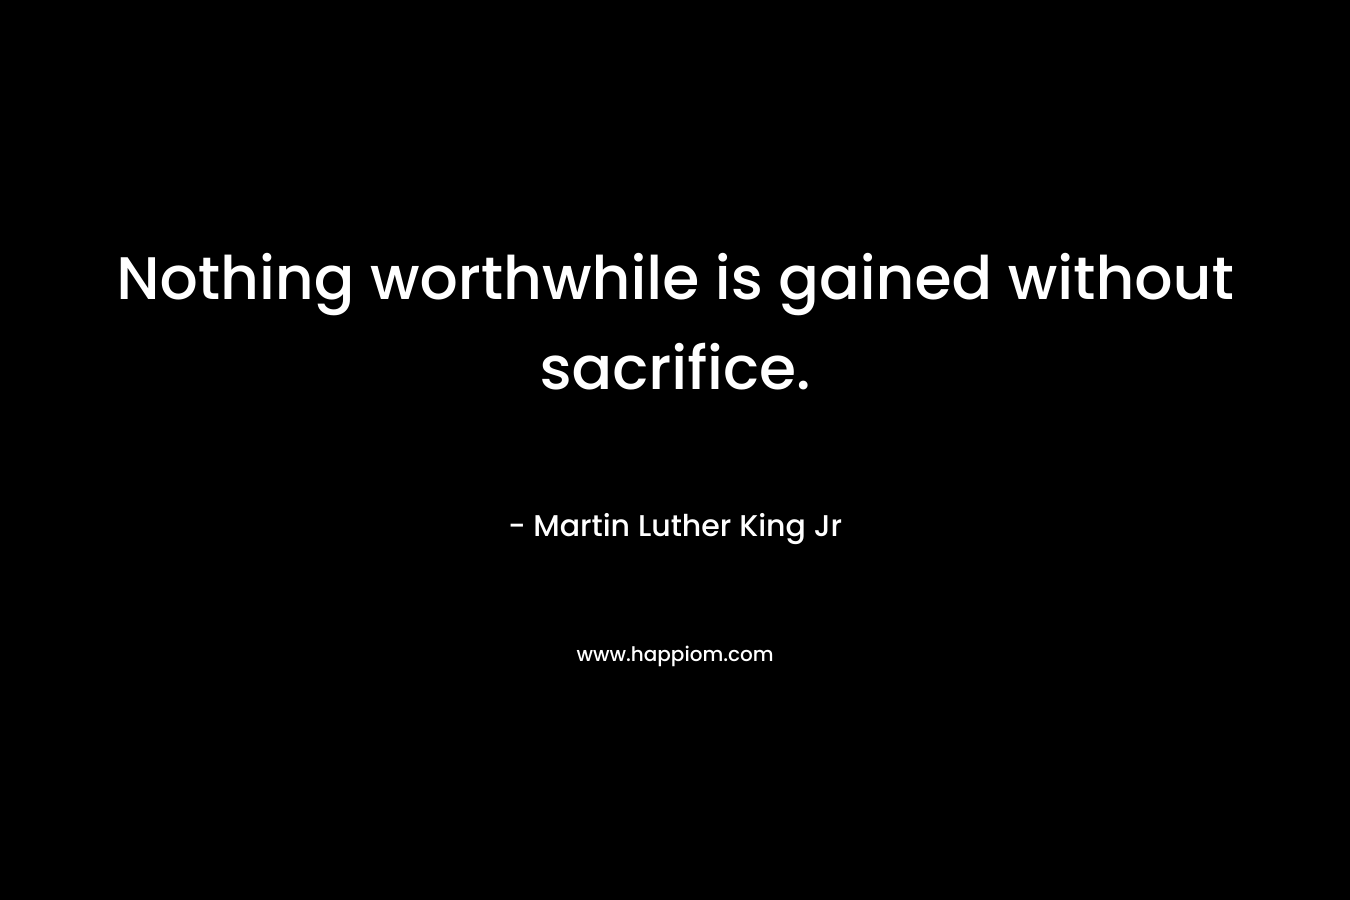 Nothing worthwhile is gained without sacrifice.